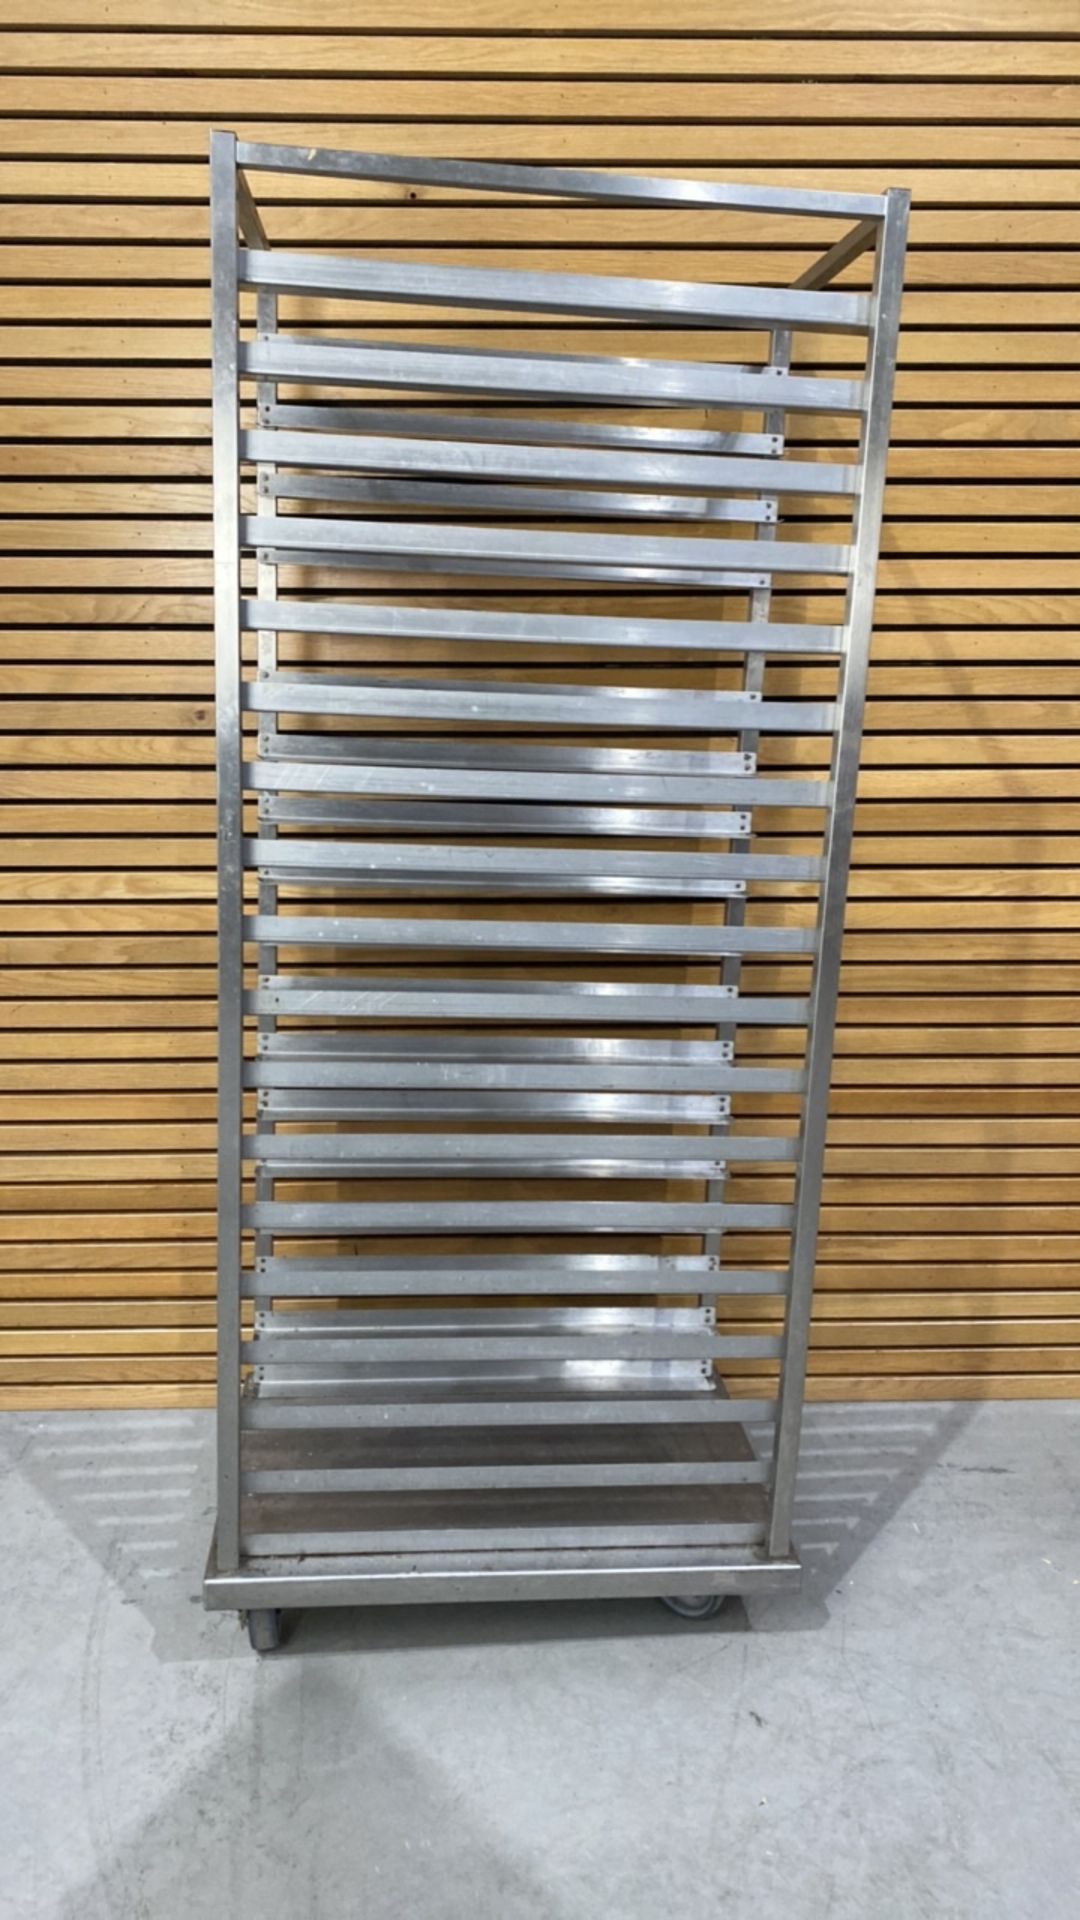 Stainless Steel Tray/Sheet Rack - Image 3 of 3